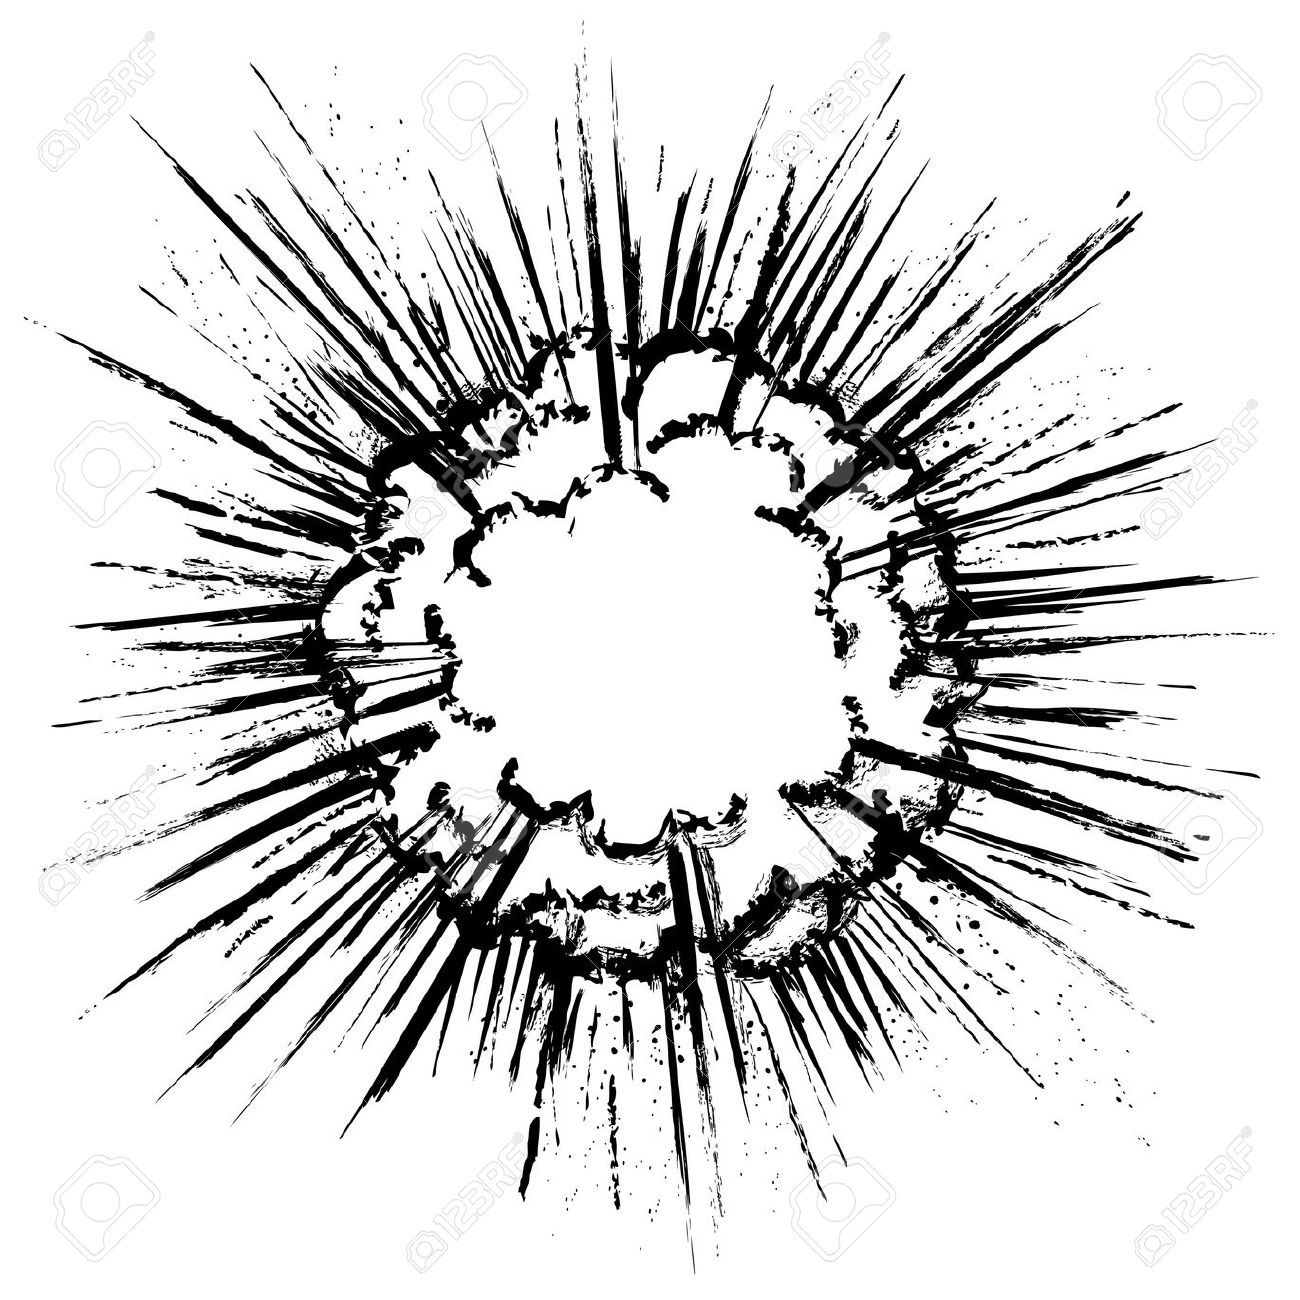 Bomb clipart sketch. Images for blast cartoon